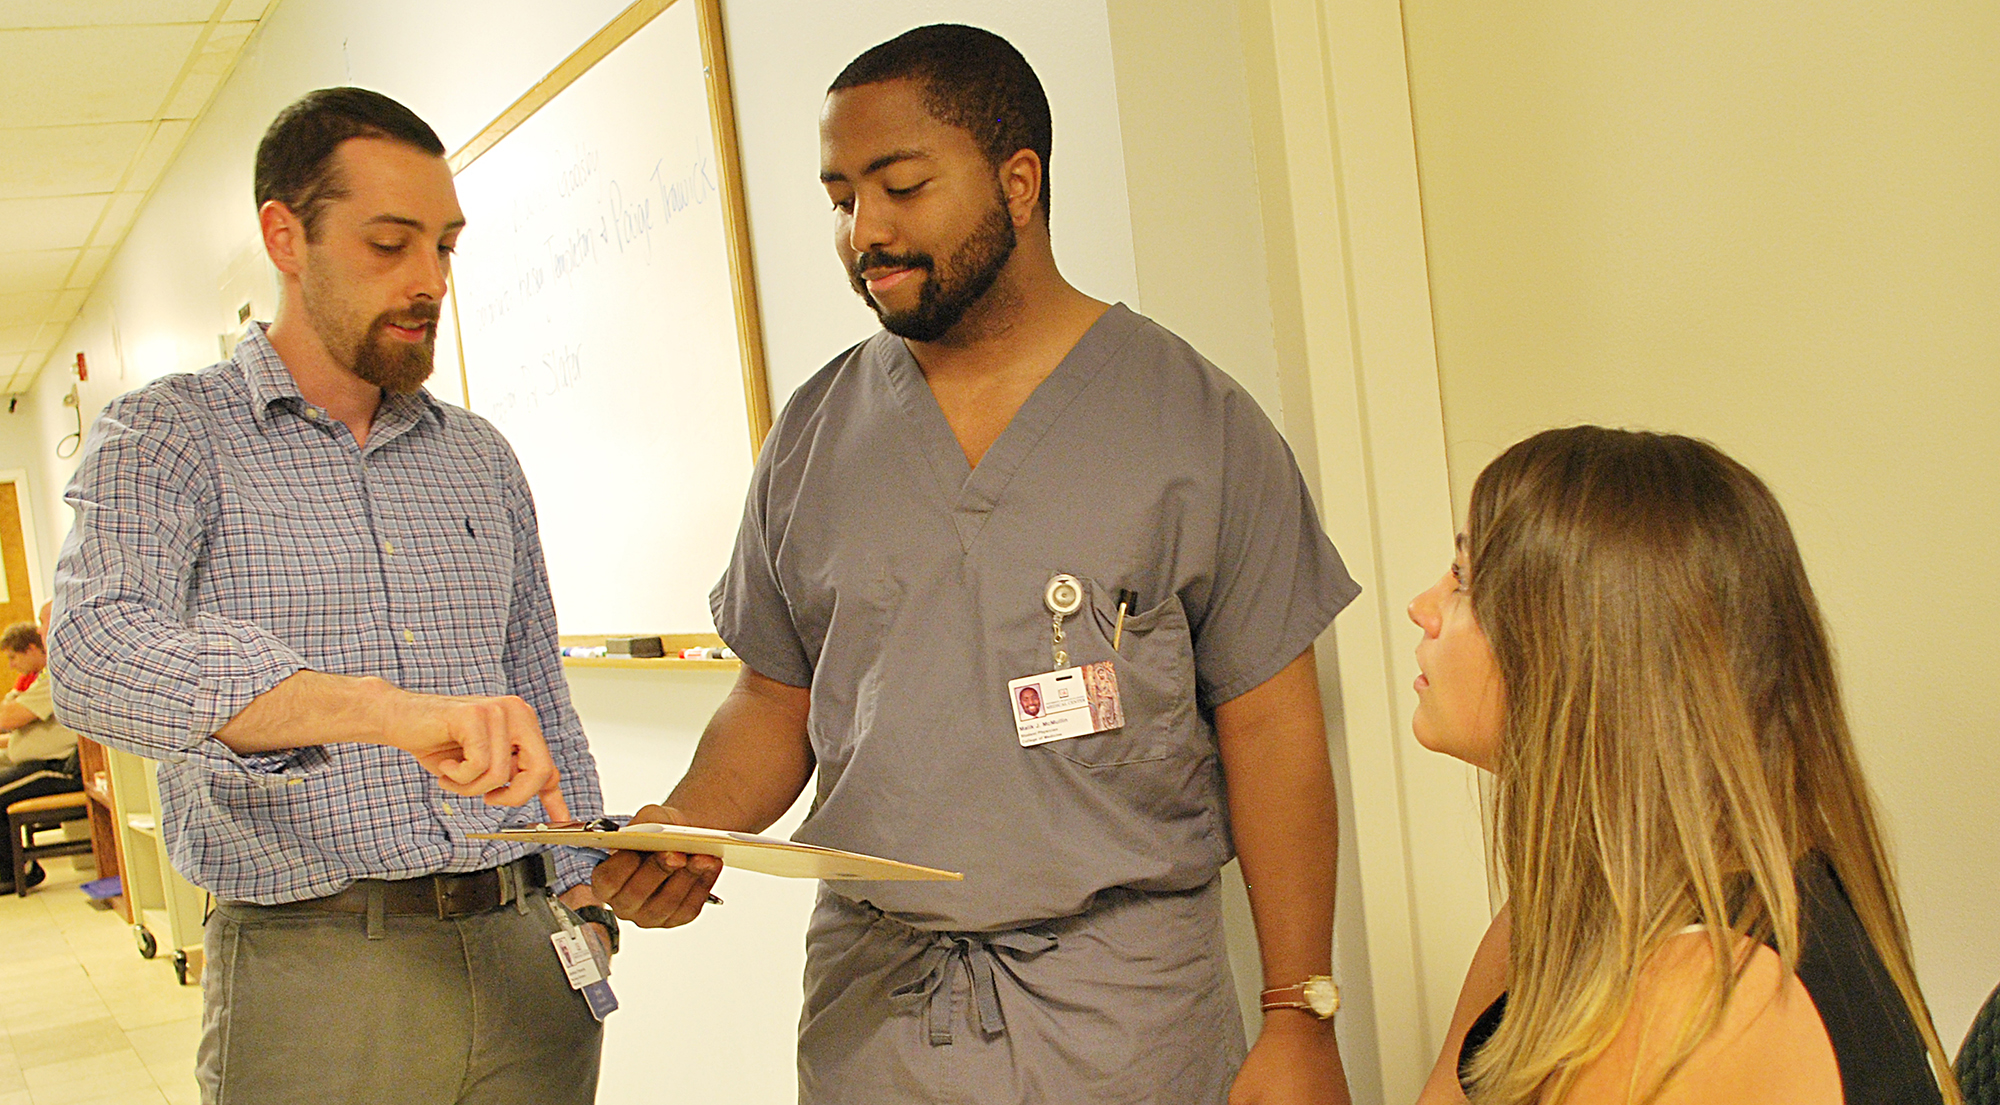 A pharmacy student and a medical student discuss a patient's chart while a faculty member observes